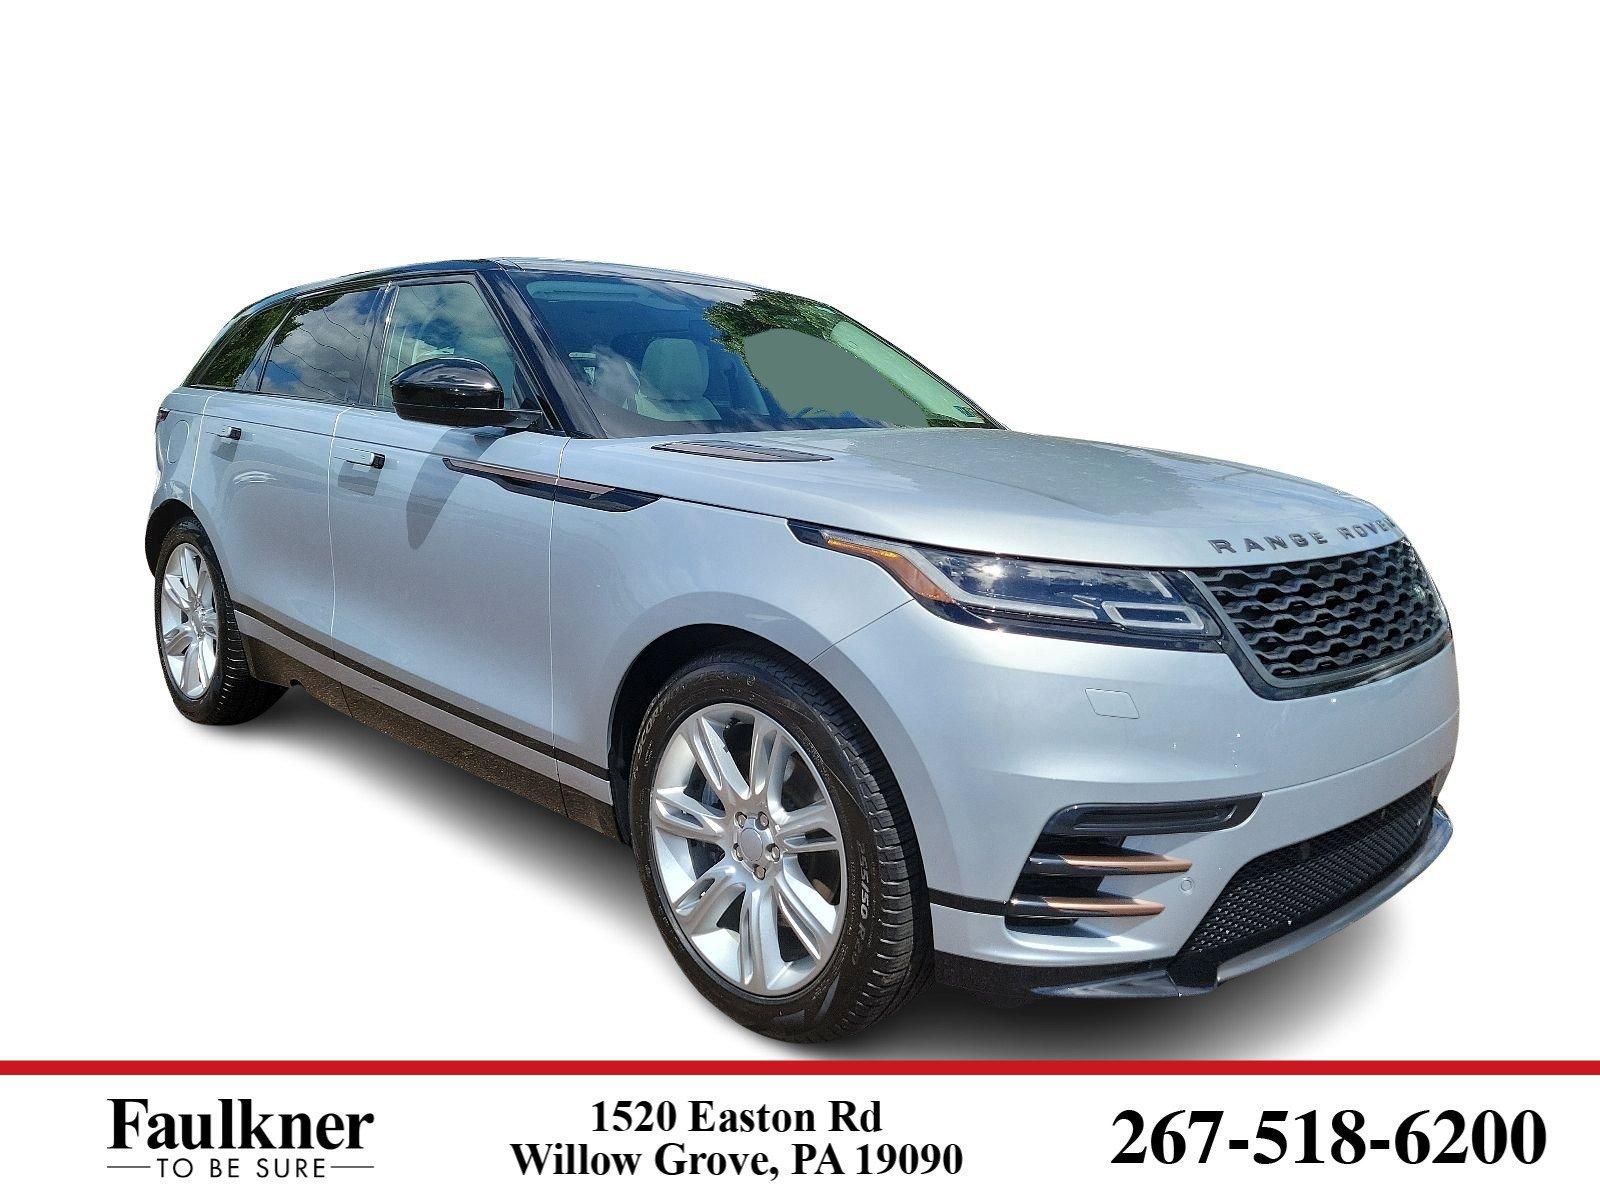 2022 Land Rover Range Rover Velar Vehicle Photo in Willow Grove, PA 19090